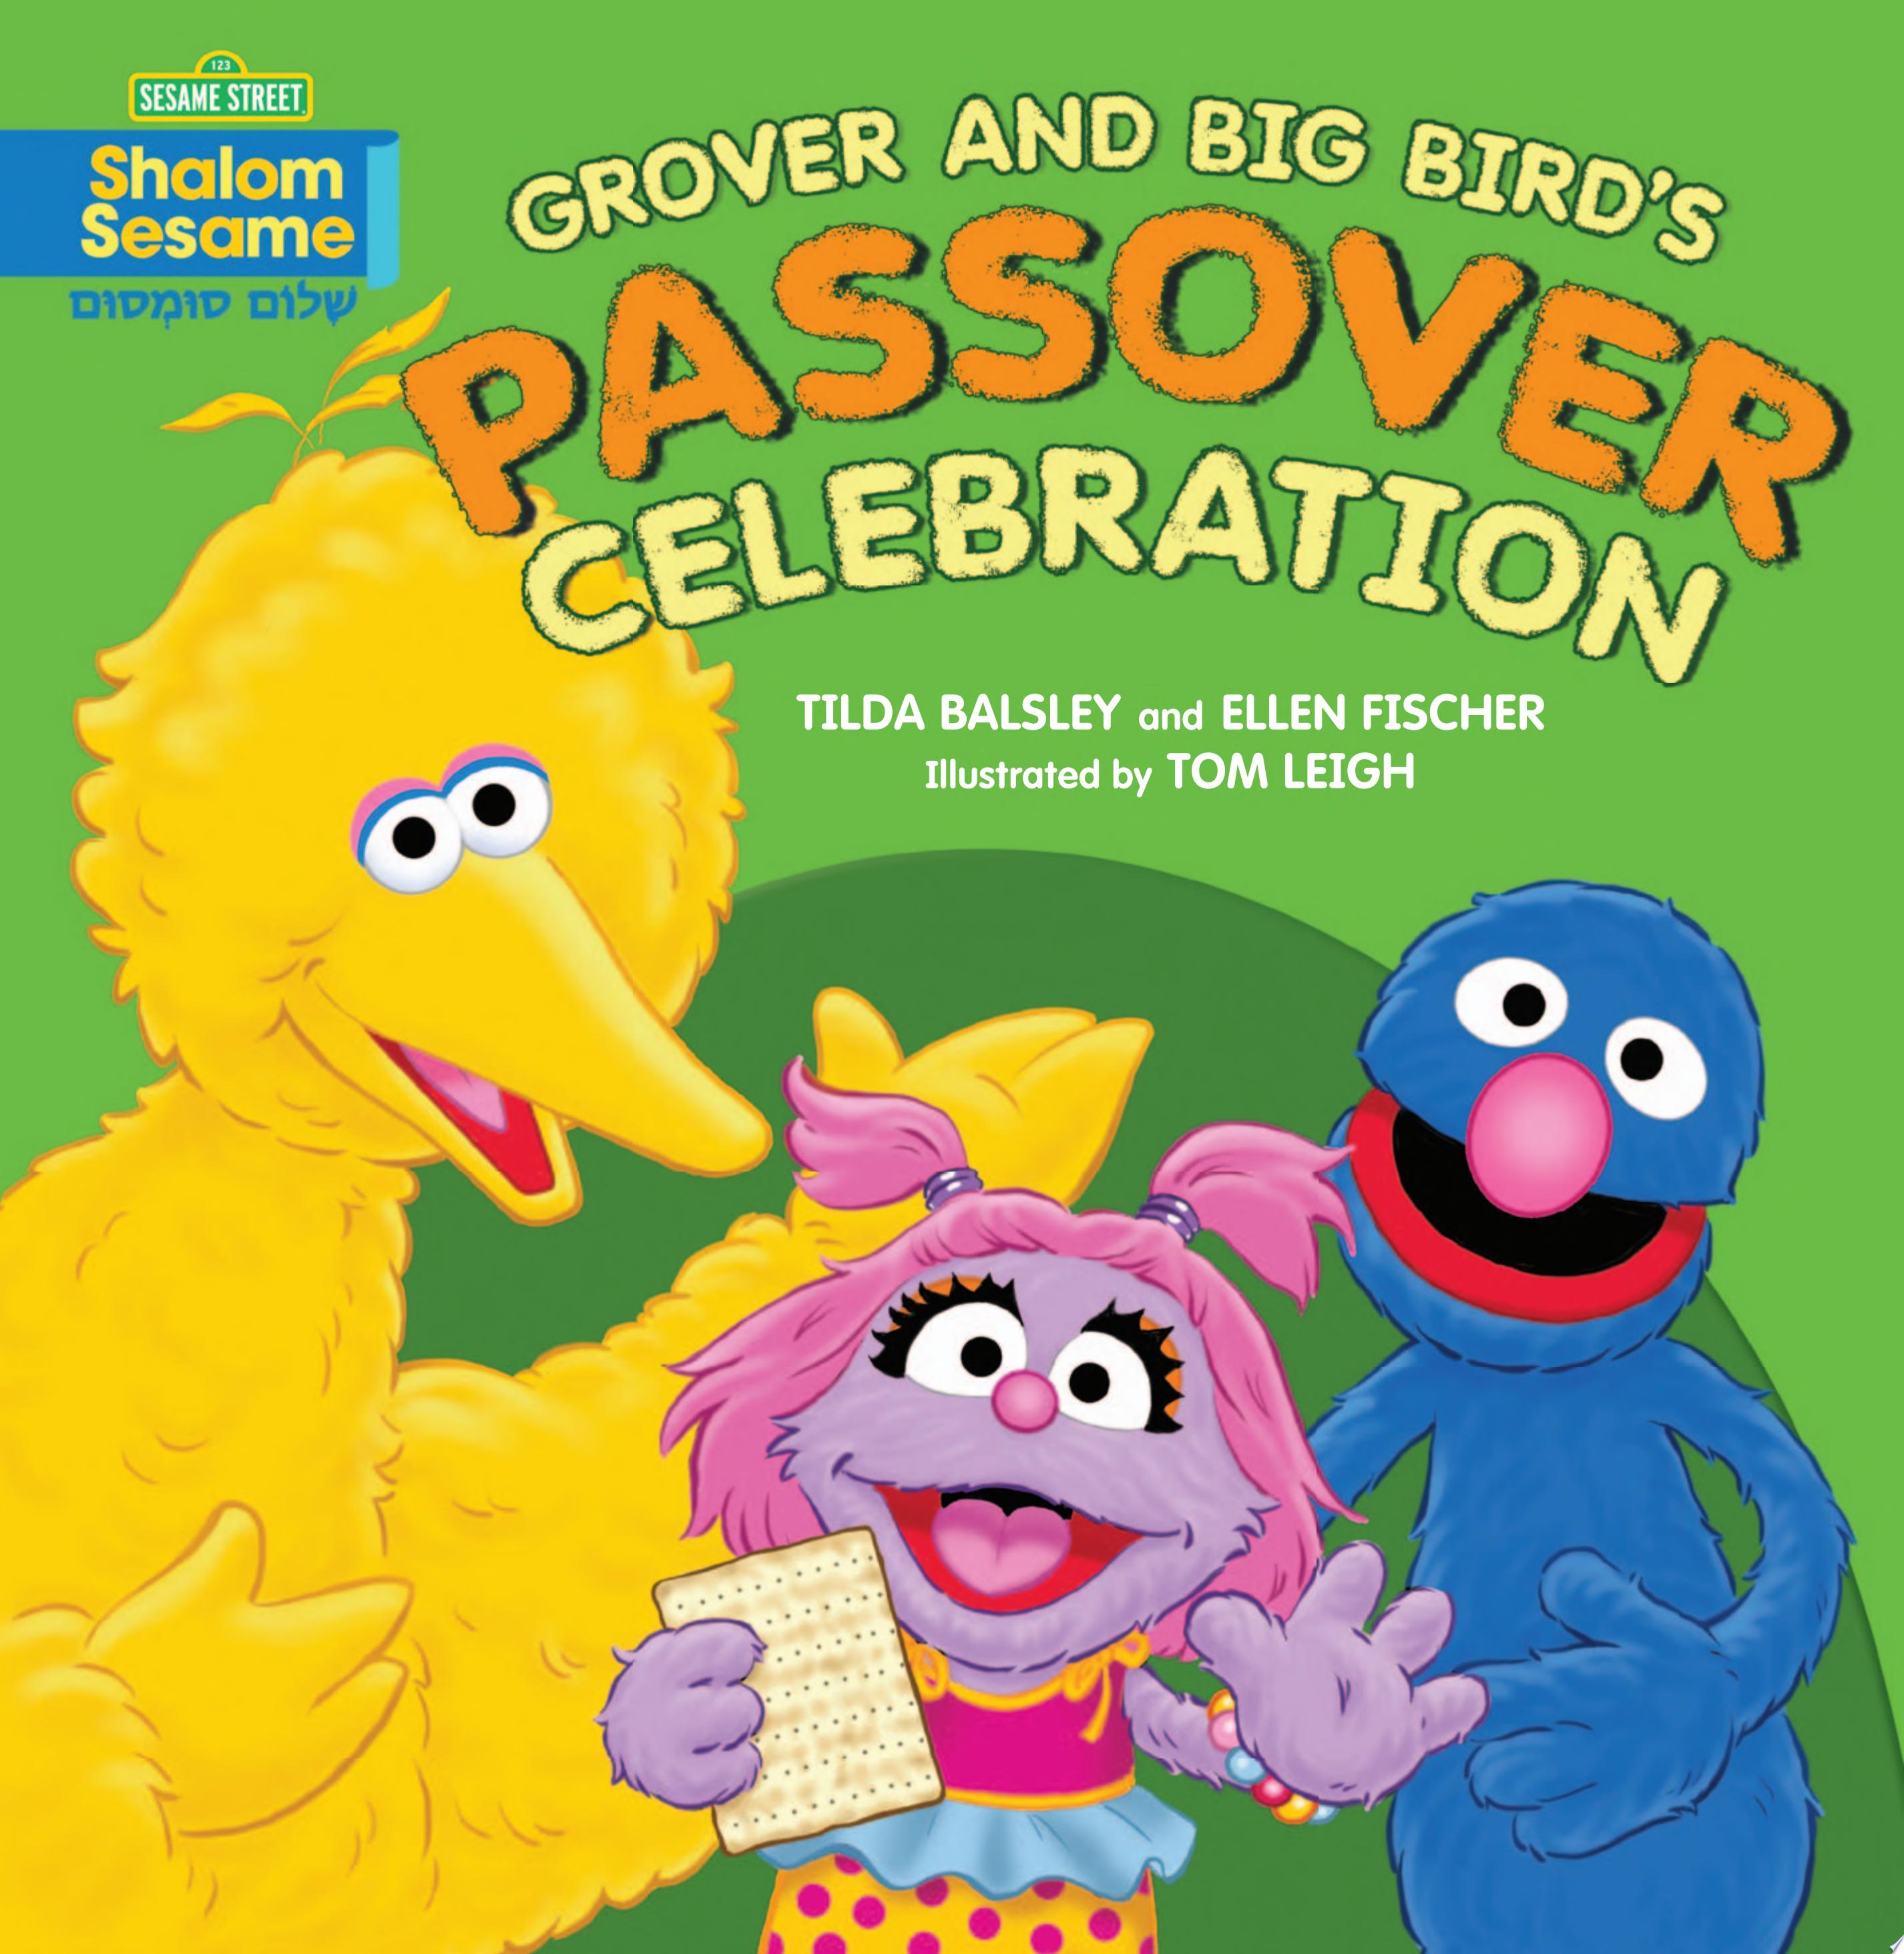 Image for "Grover and Big Bird's Passover Celebration"